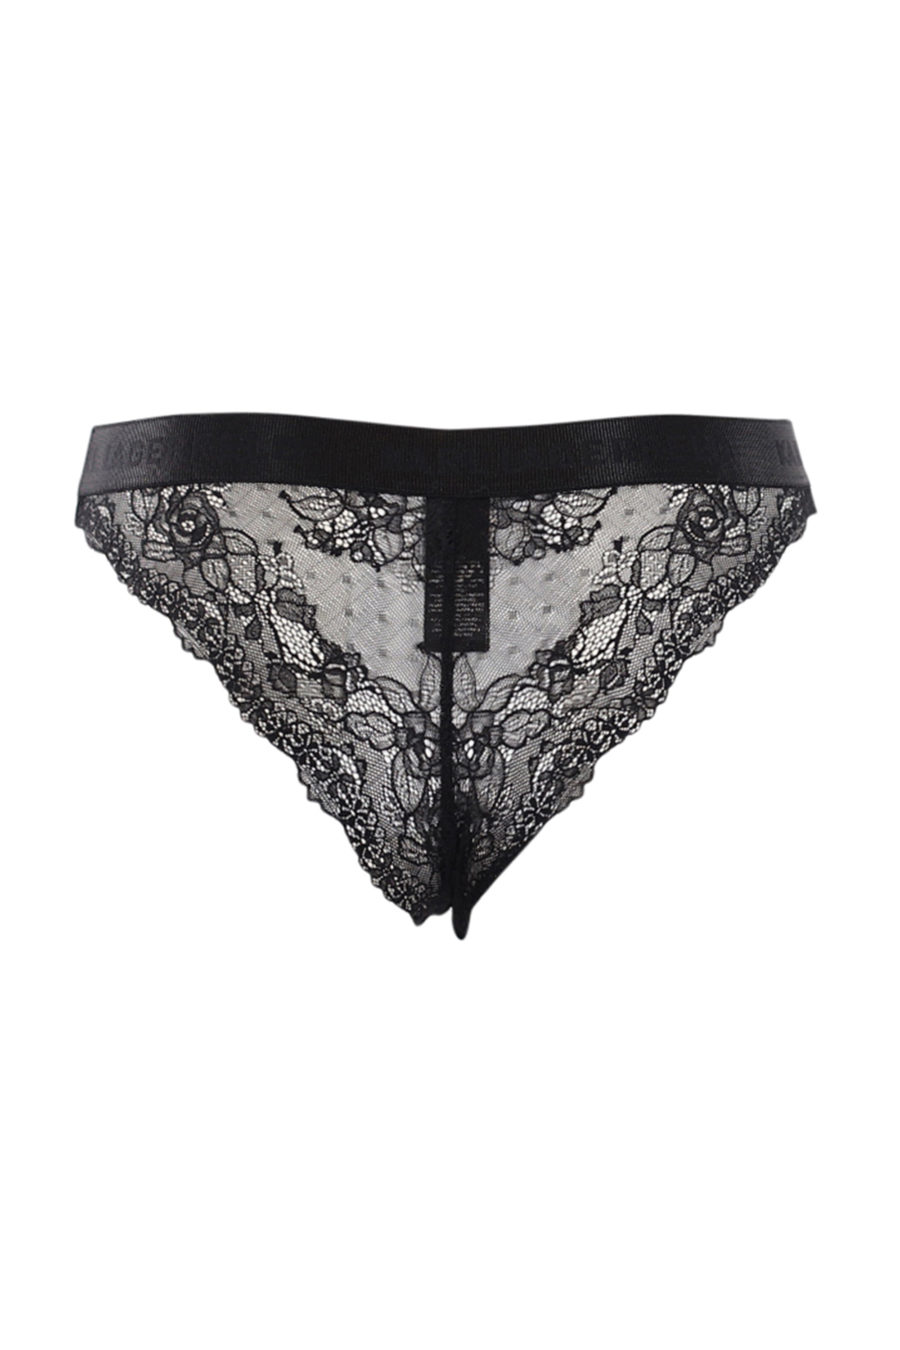 Black knickers with lace detail - IMG 0604